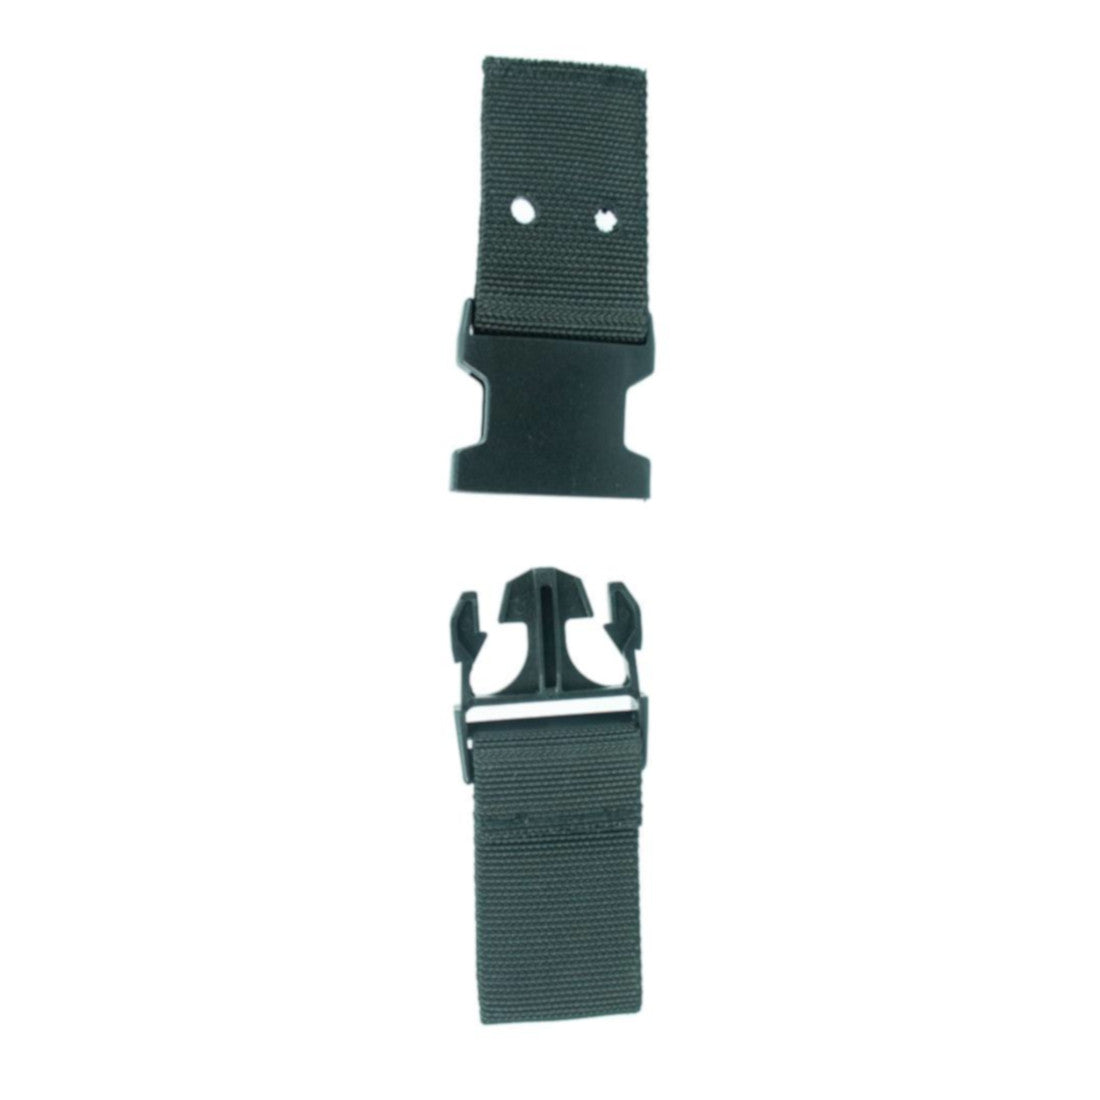 Ettore Sidekick Holster Male / Female Clip Ends - Unclipped - Front View